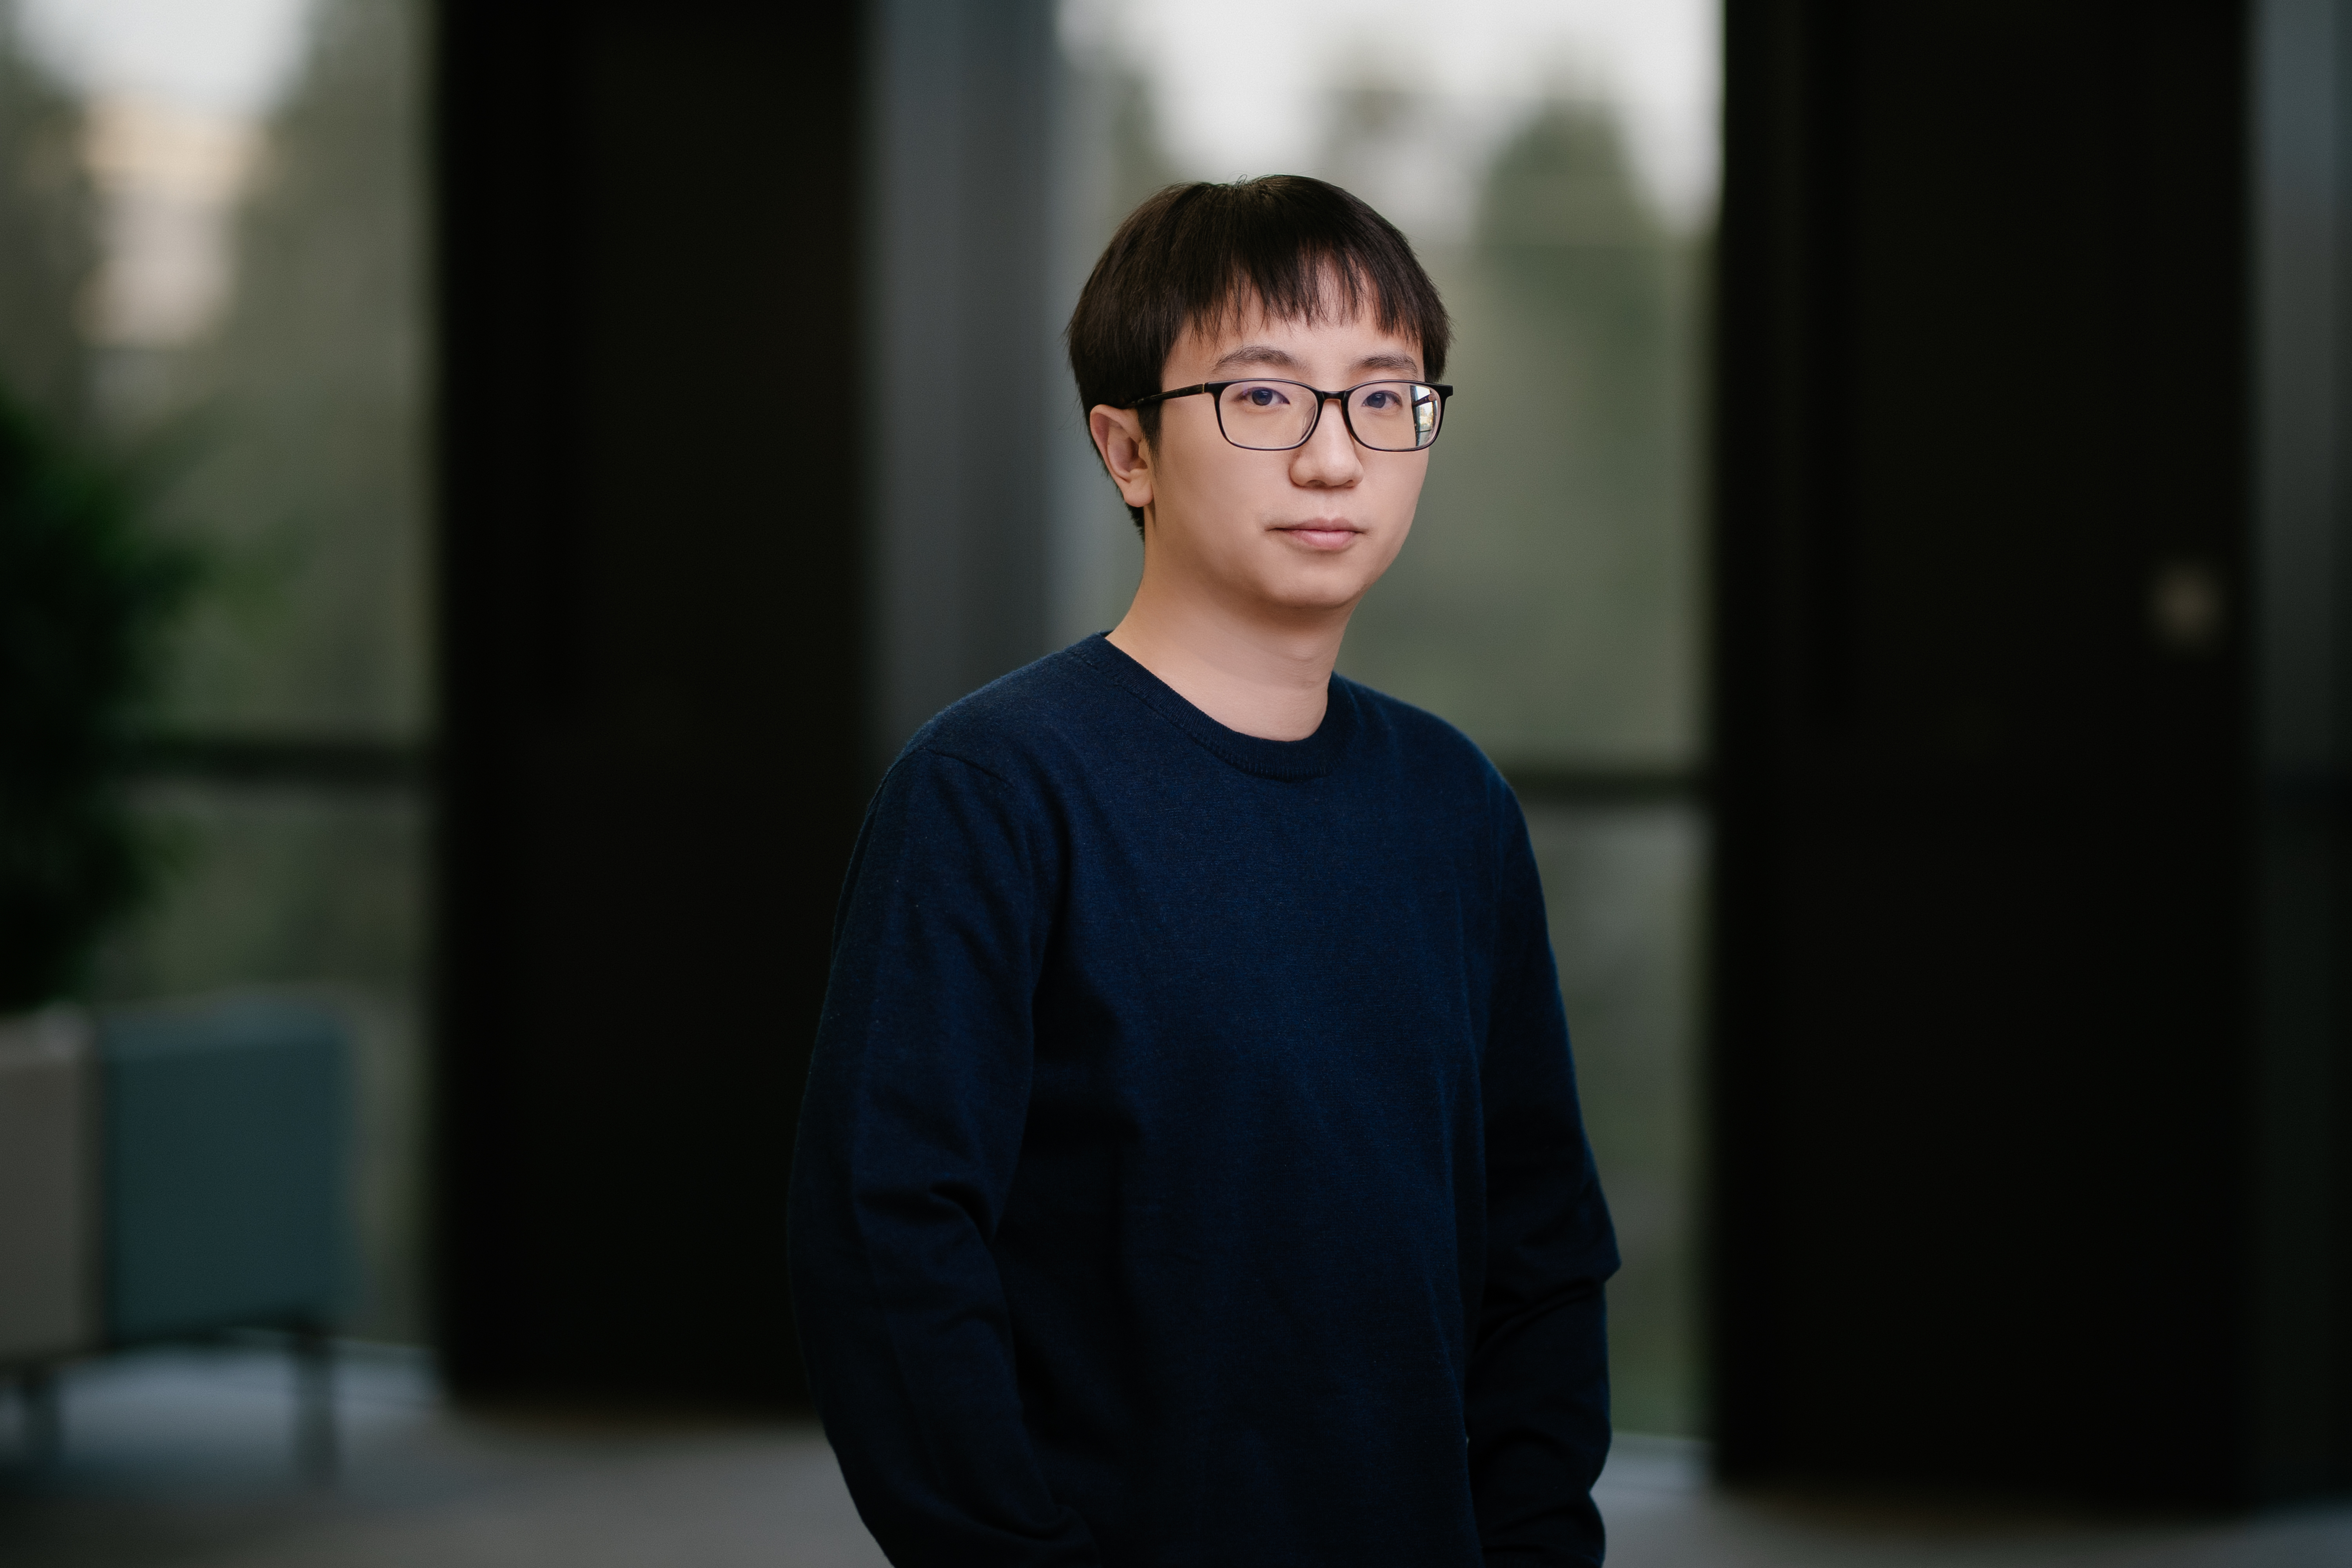 Lightelligence’s Dr. Yichen Shen Named INNOVATOR UNDER 35 by MIT Technology Review 2021